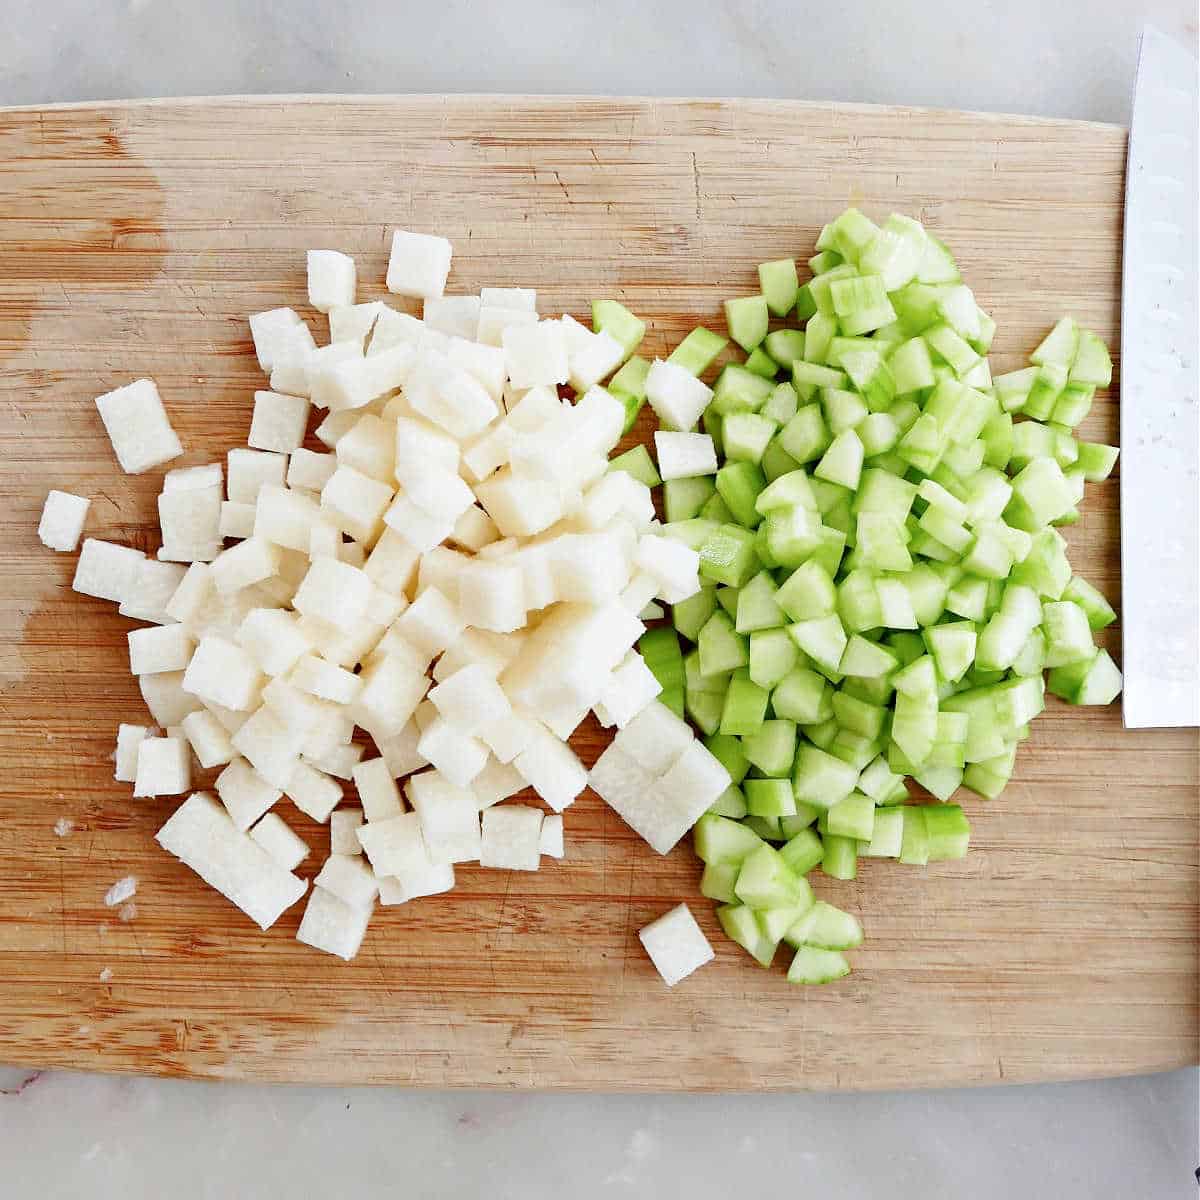 diced jicama and cucumber on a cutting board next to a chef's knife